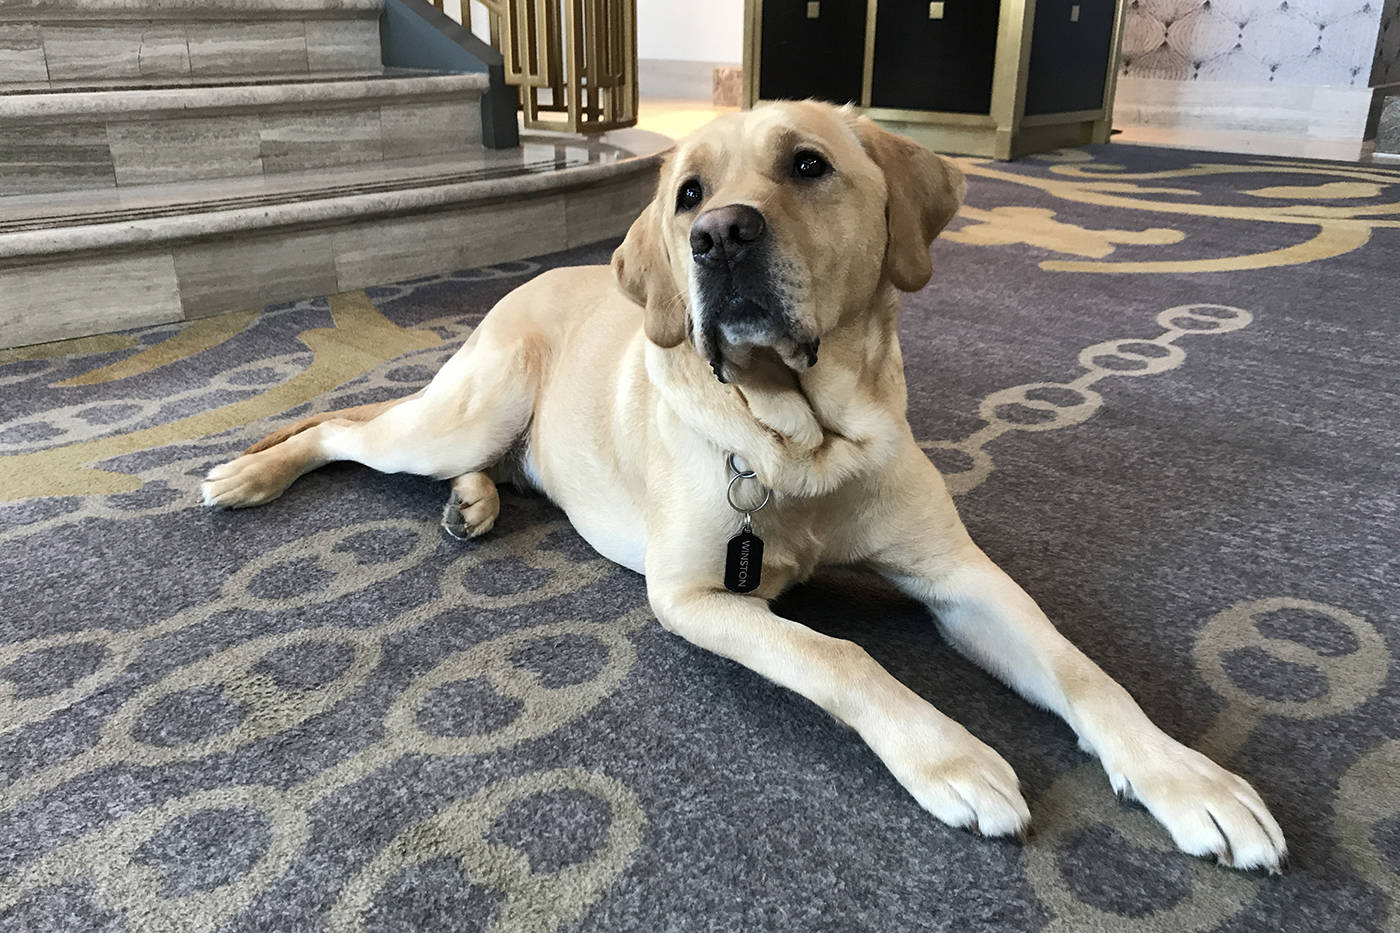 Trained as a guide dog in Ontario by the Canadian Guide Dogs for the Blind, Winston didn’t quite make the cut as a professional service dog as he was “too friendly”. (Keri Coles/News staff)